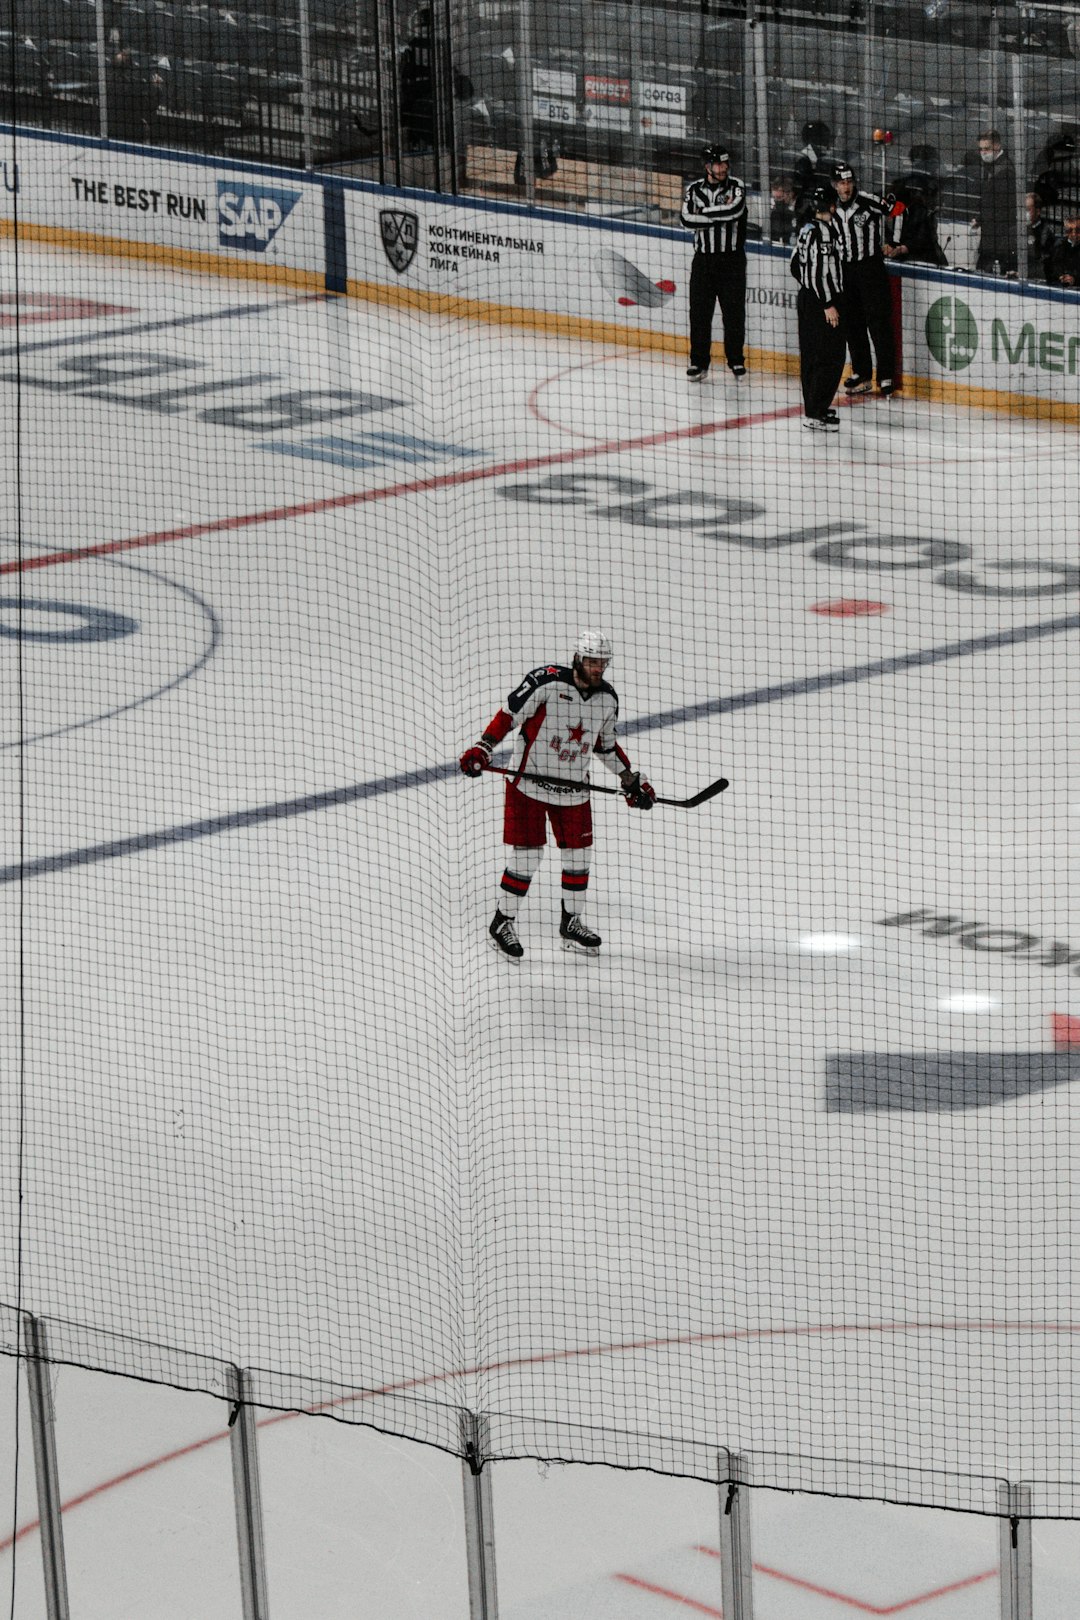 man in white and red jersey shirt and black pants playing ice hockey